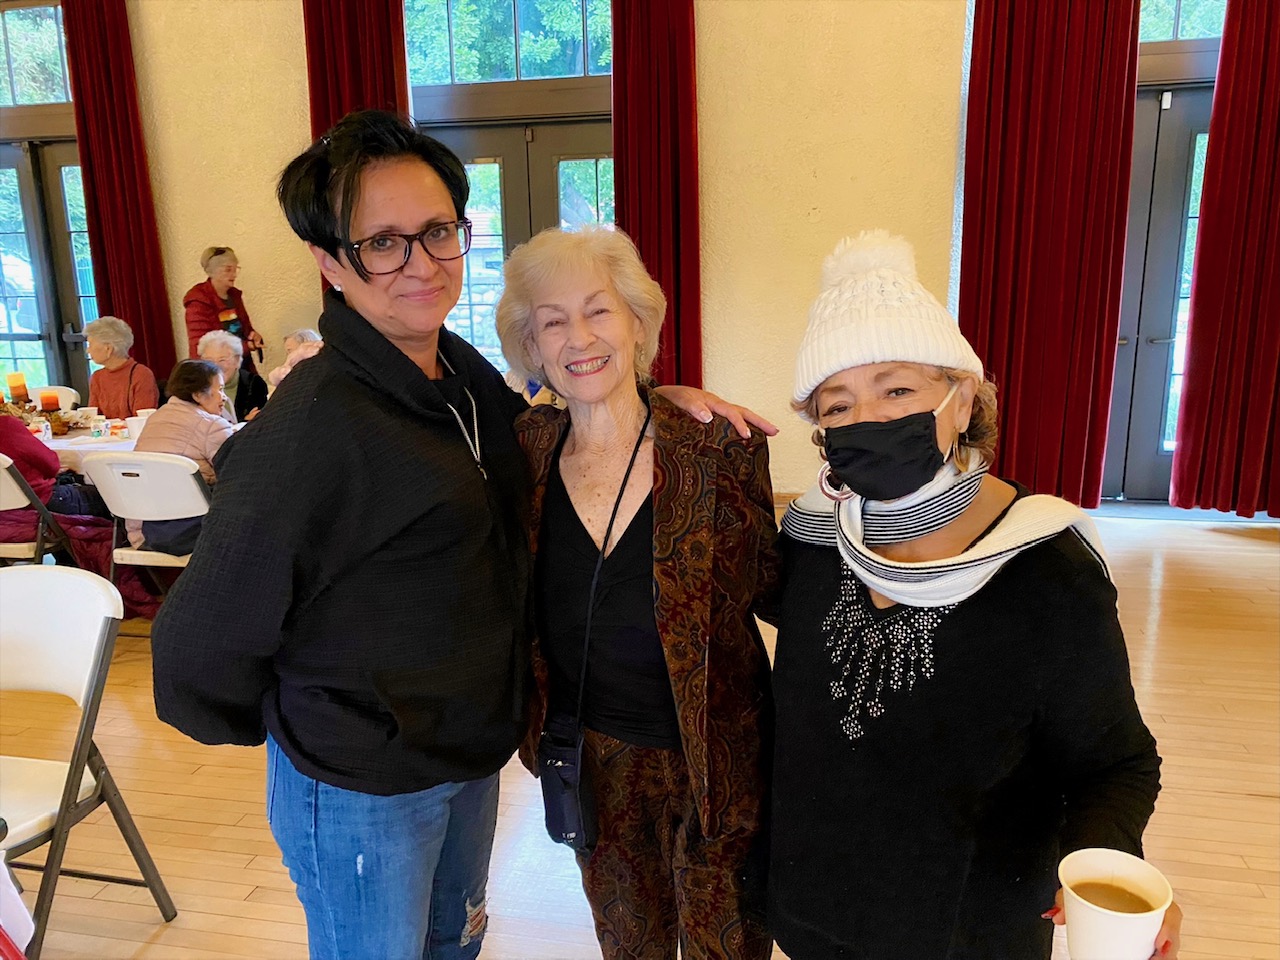 PHOTO: Alisa Hayashida | The South Pasadenan | Former Senior Center Director enjoyed visiting with Lucy King and other seniors at the Thanksgiving celebration for seniors at the War Memorial Building.